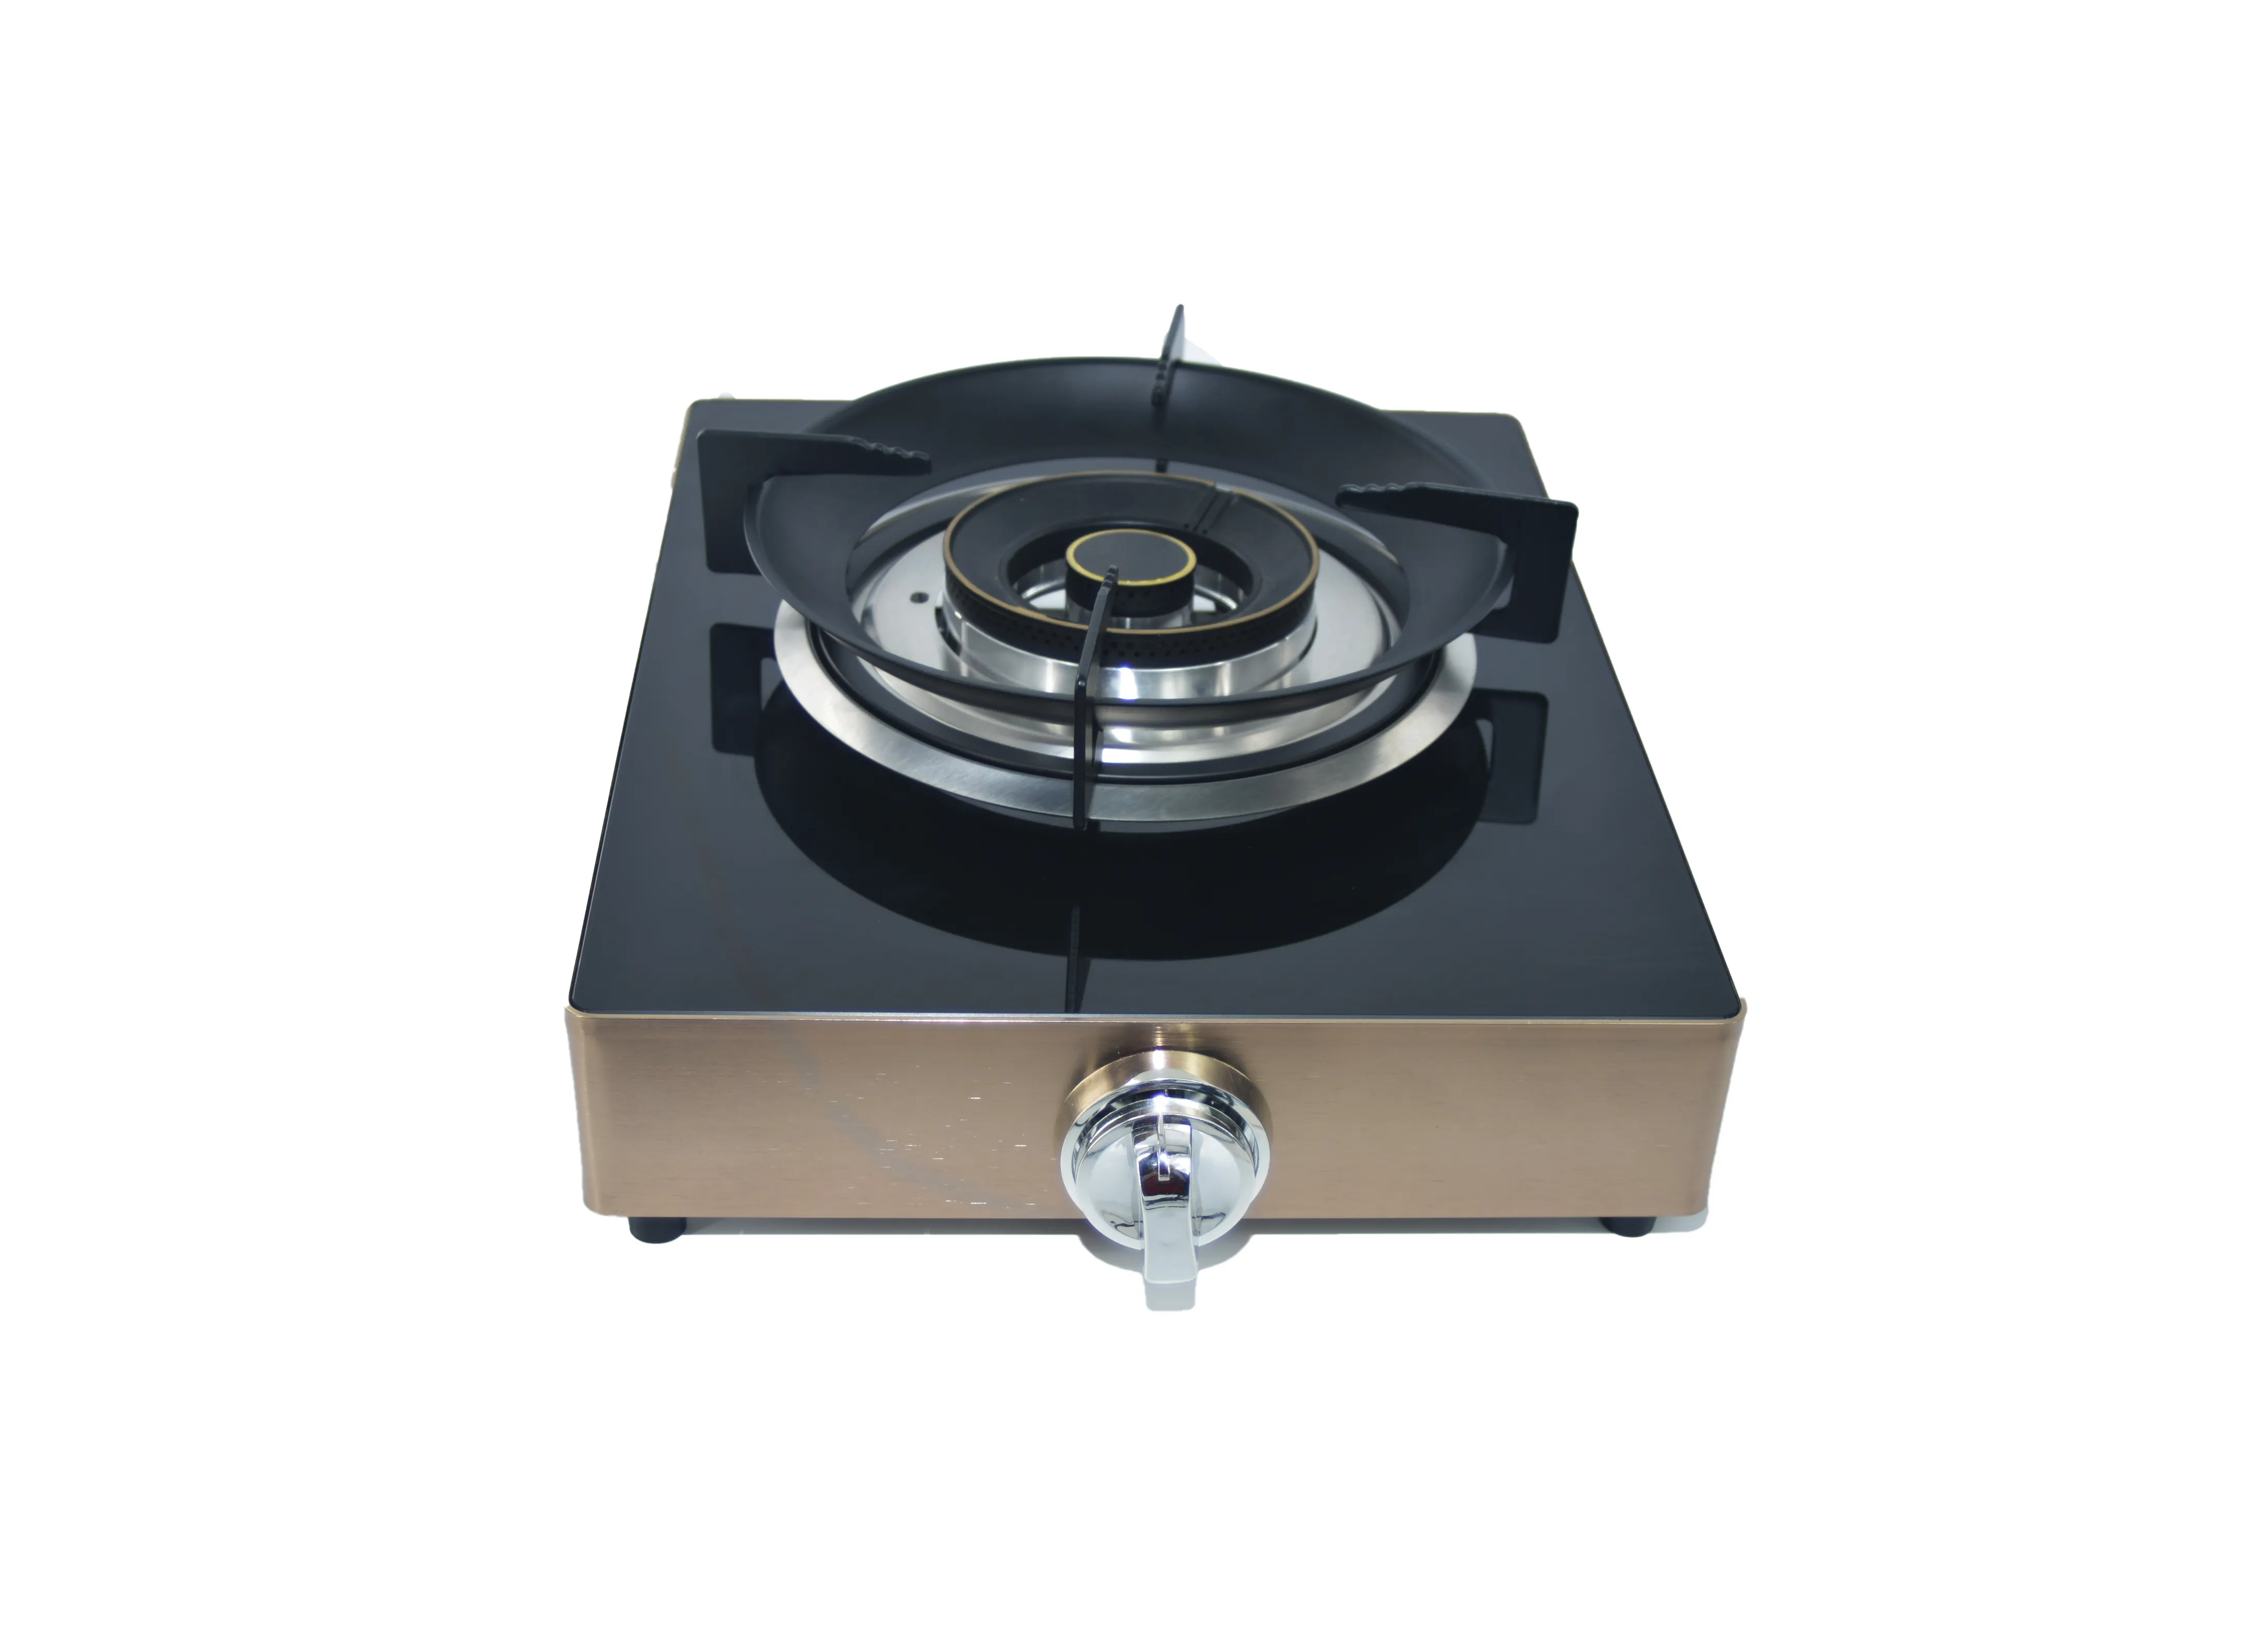 High-Powered Single Head Gas Stove Large Firepower China-Made with Natural Gas/LPG Glass Panel Cooktop for Outdoor Use